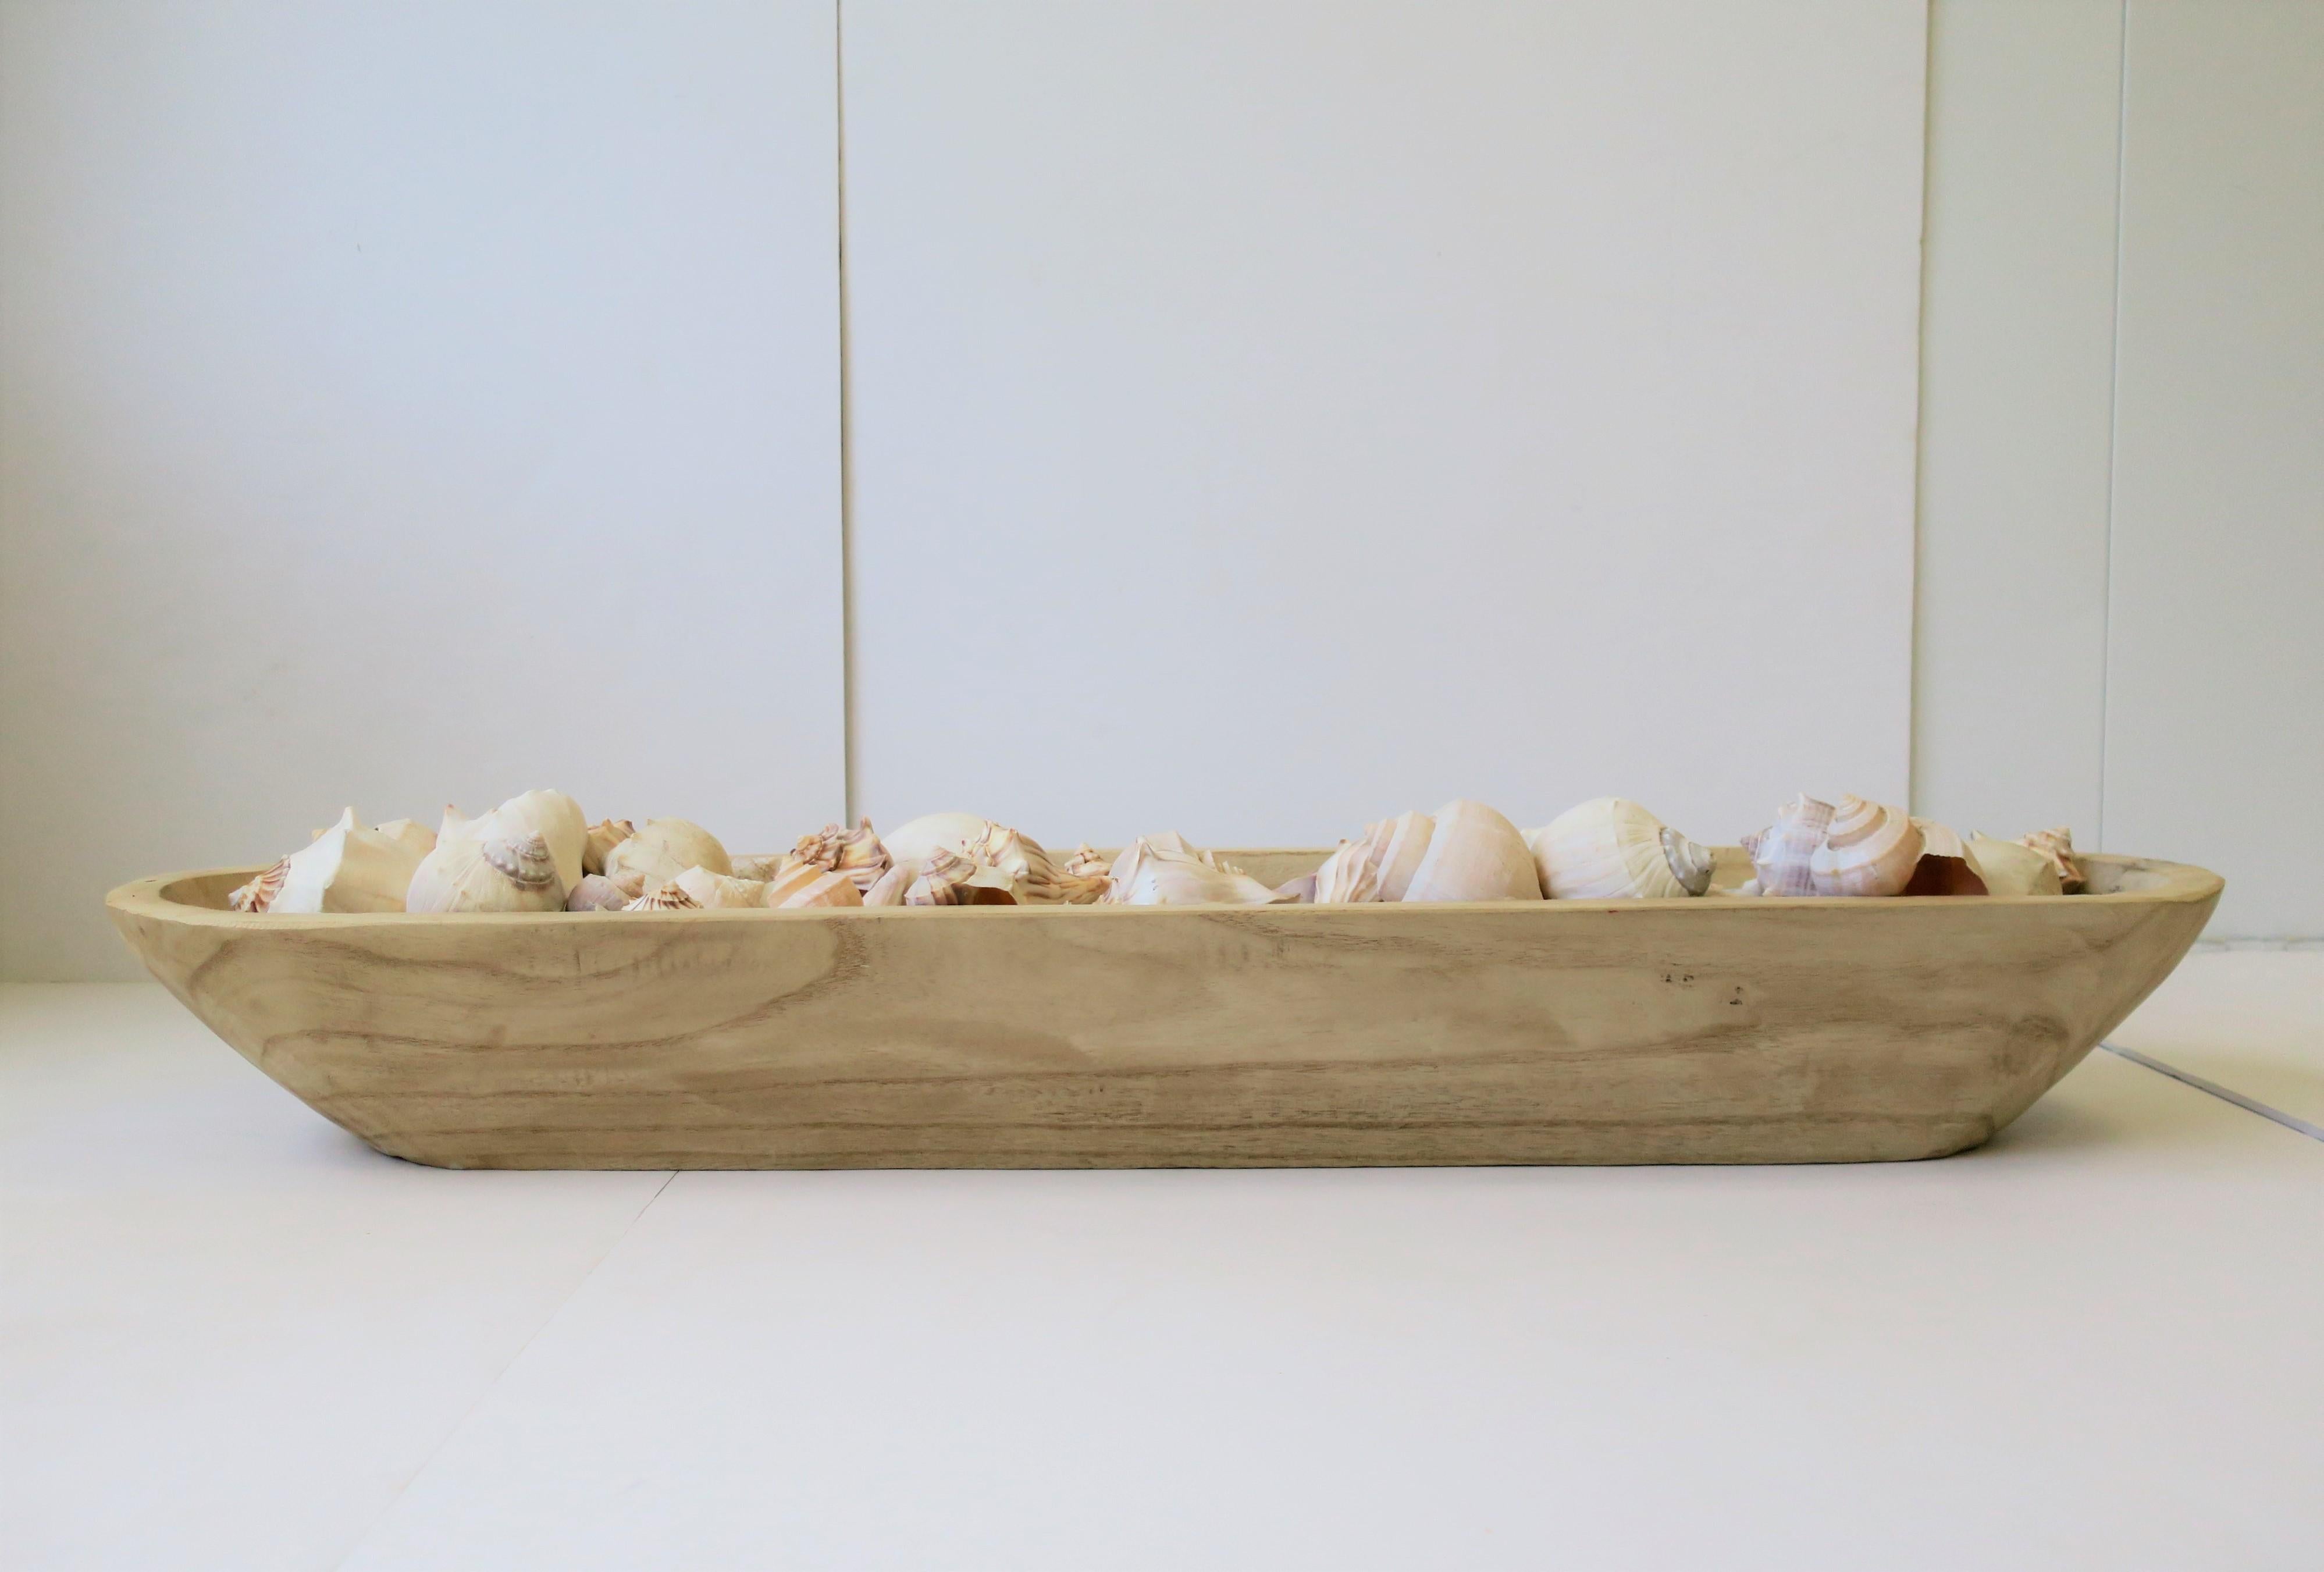 A very beautiful large grouping of all natural seashells. Vessel contains over 50+ matte white and tan/brown/off-white seashells in long/oblong hand-carved wood centerpiece. There are over 50 individual seashells in this rectangular hand-carved wood